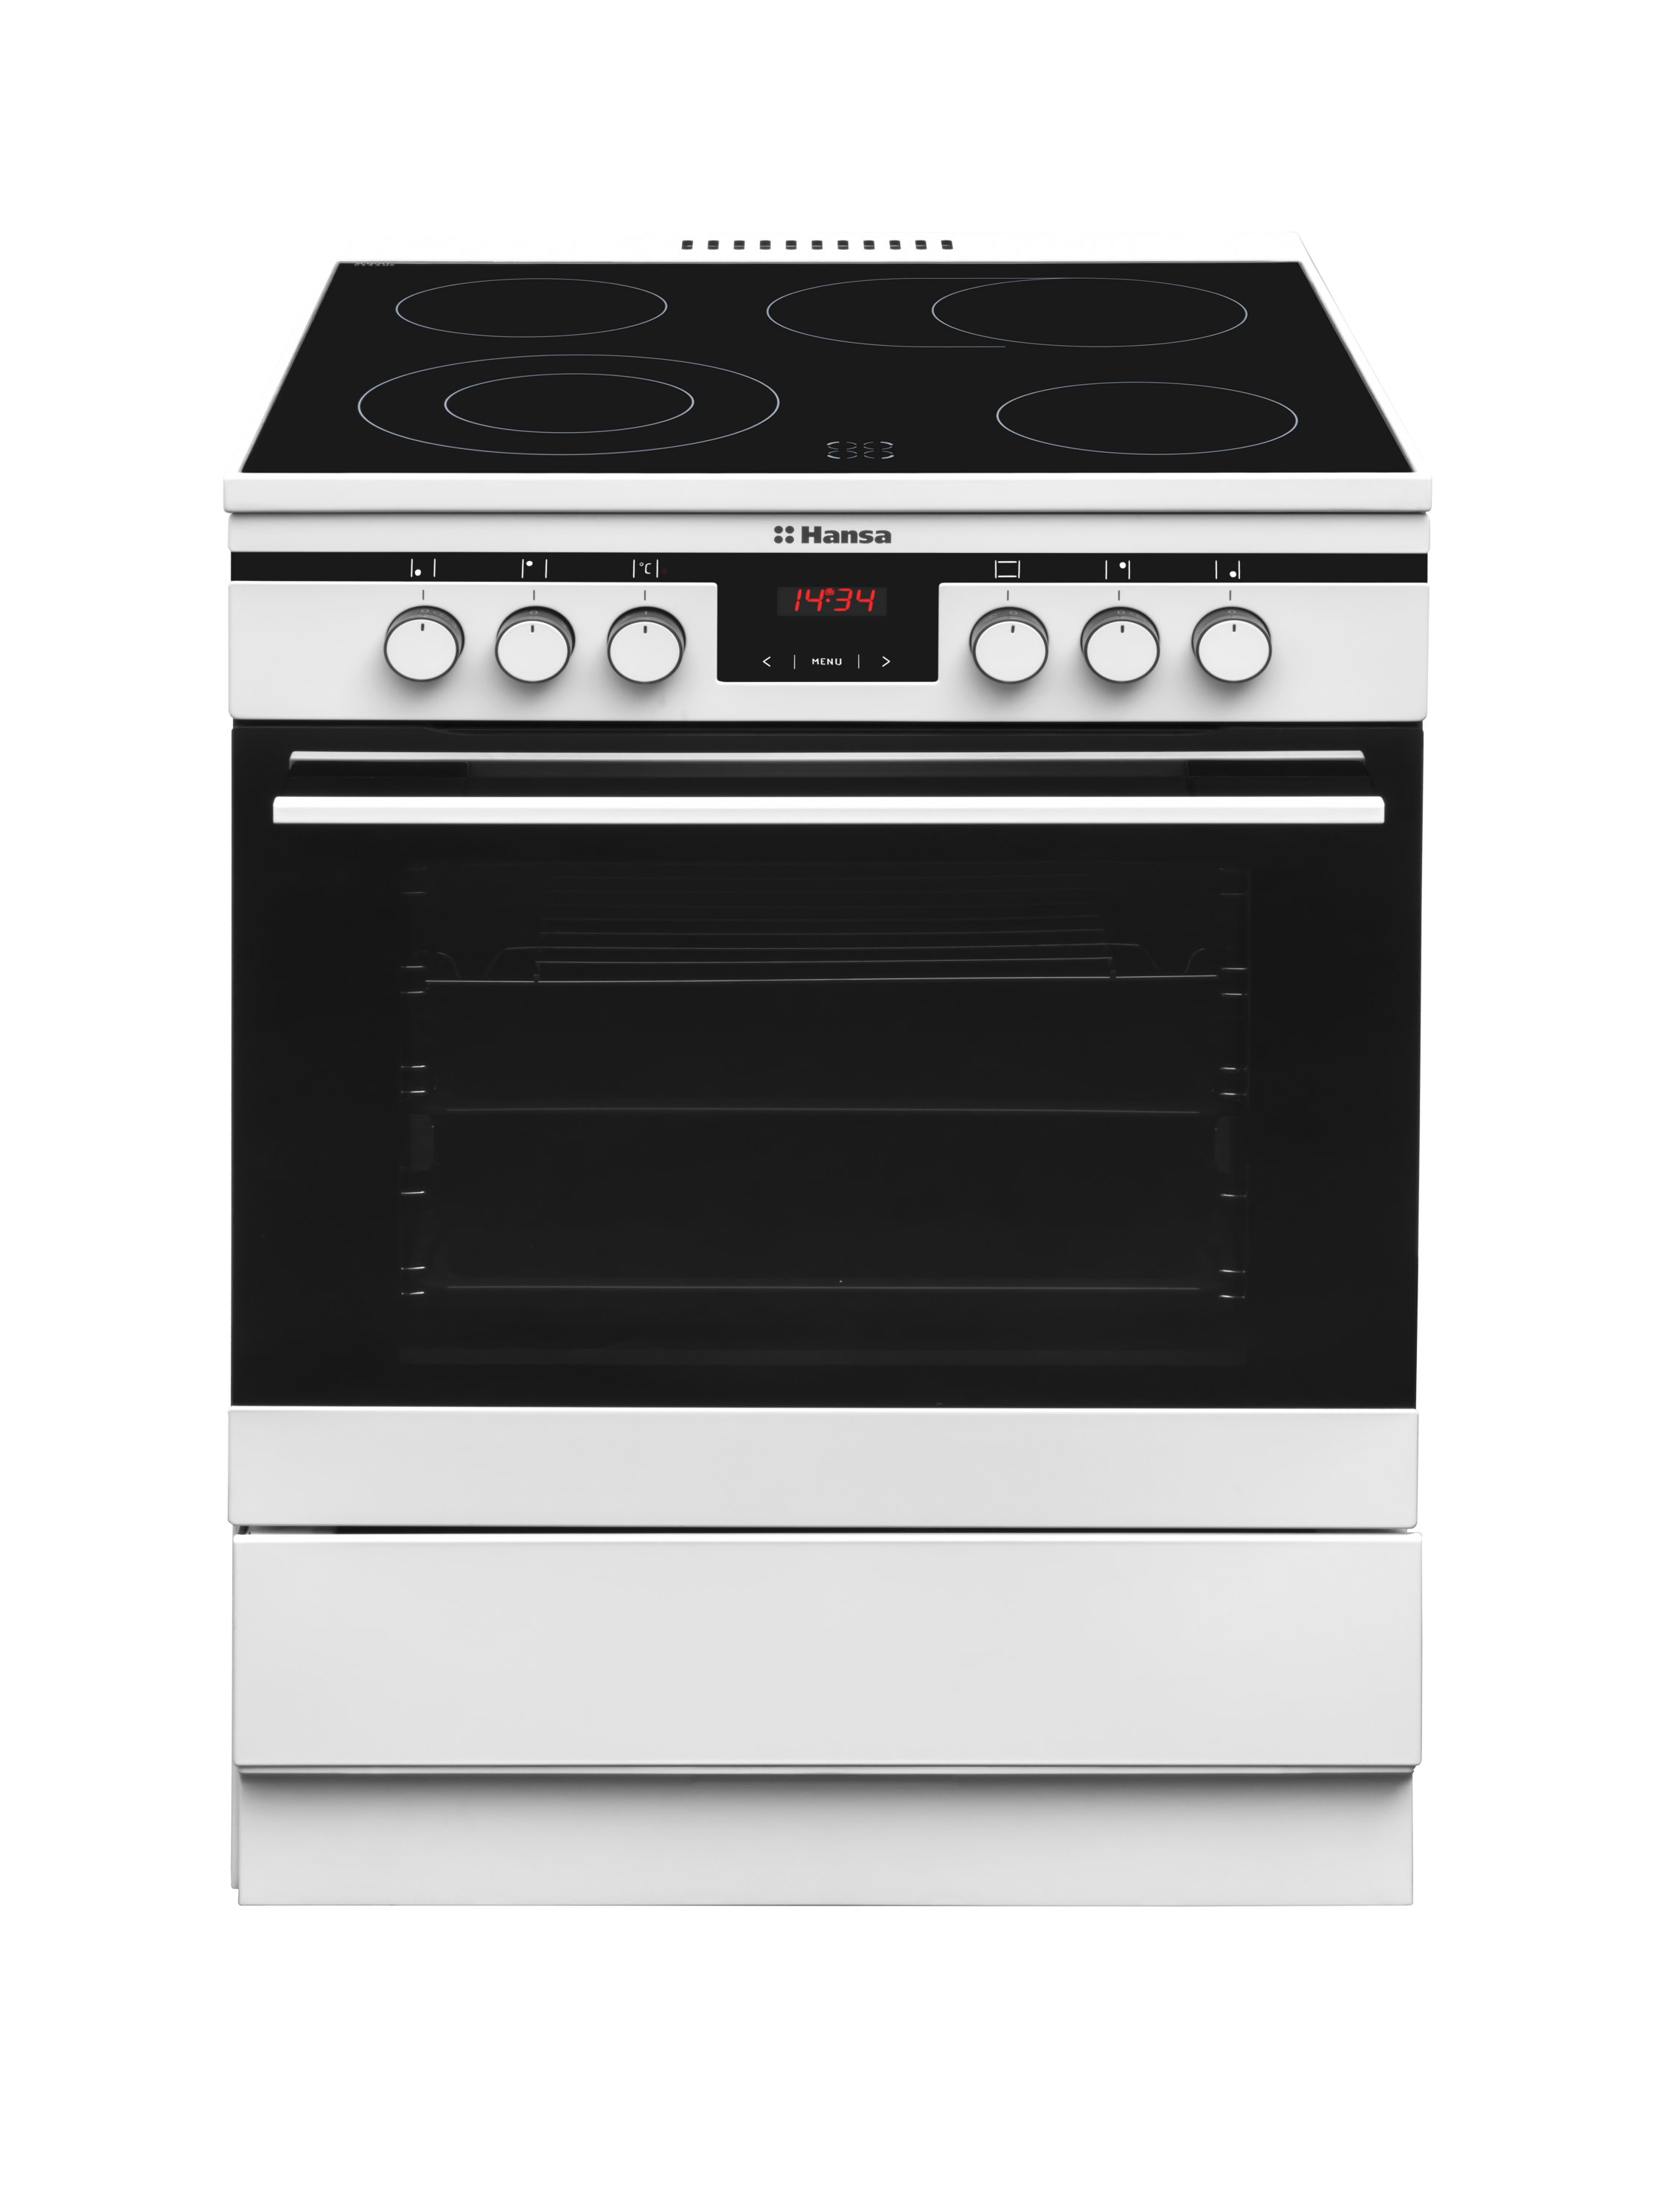 Freestanding cooker with ceramic hob